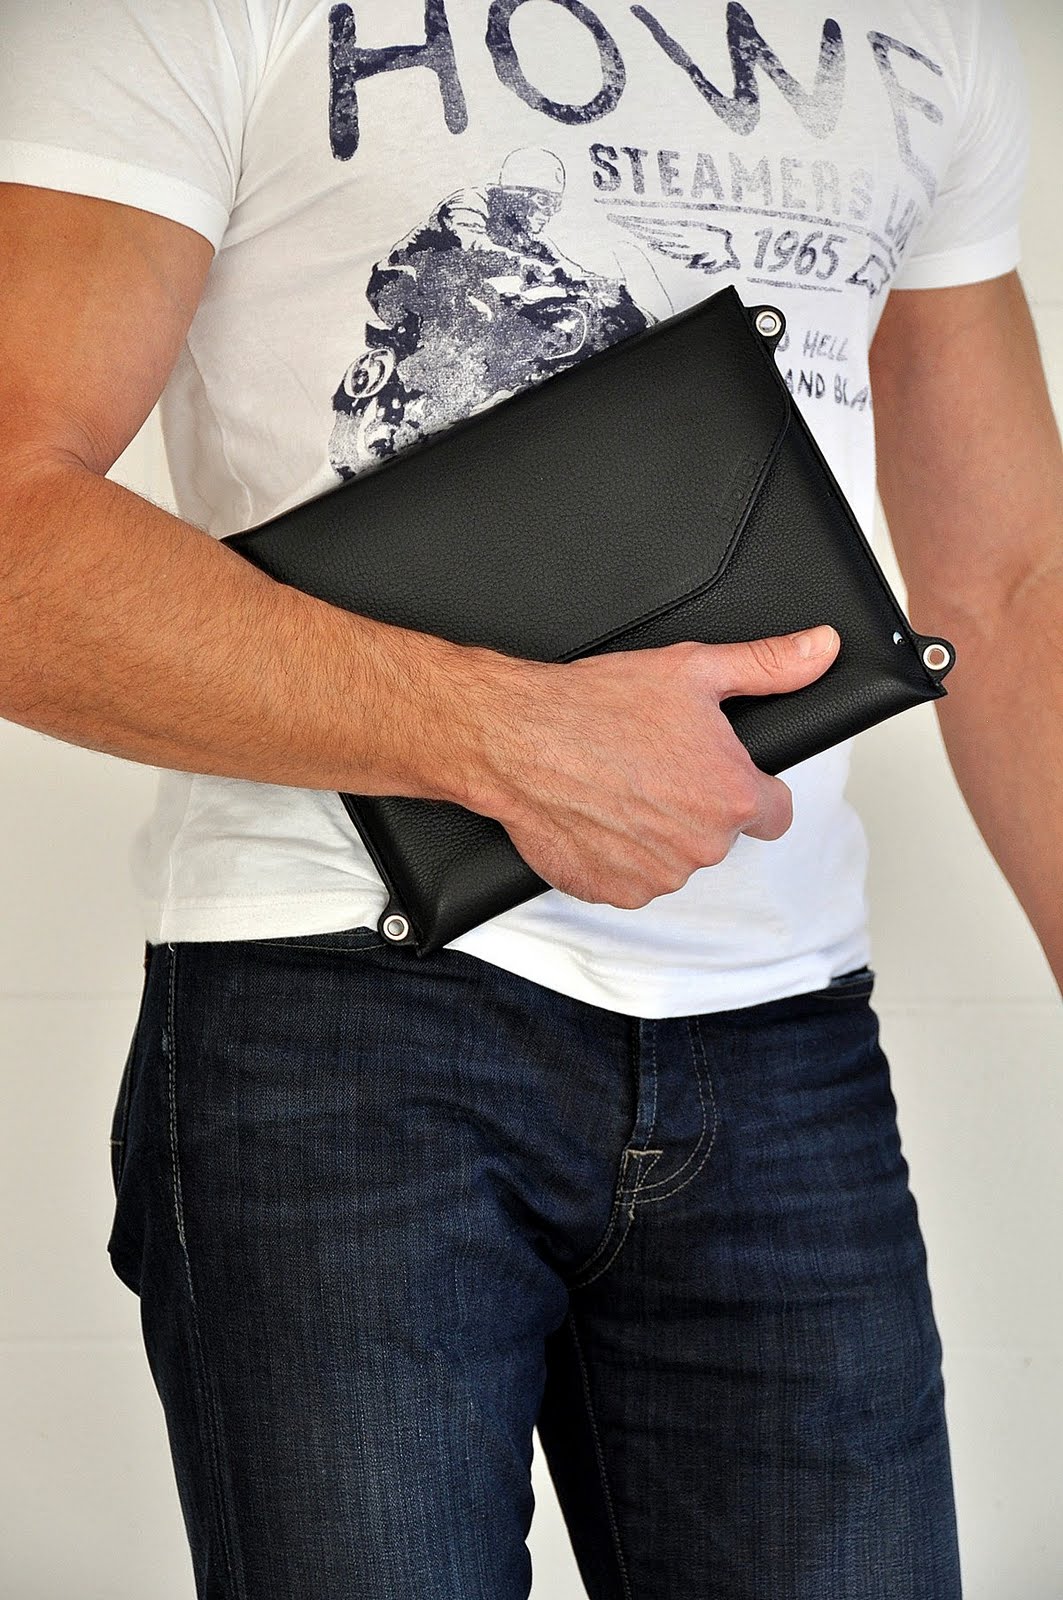 Without the strap Across is a slim portfolio case